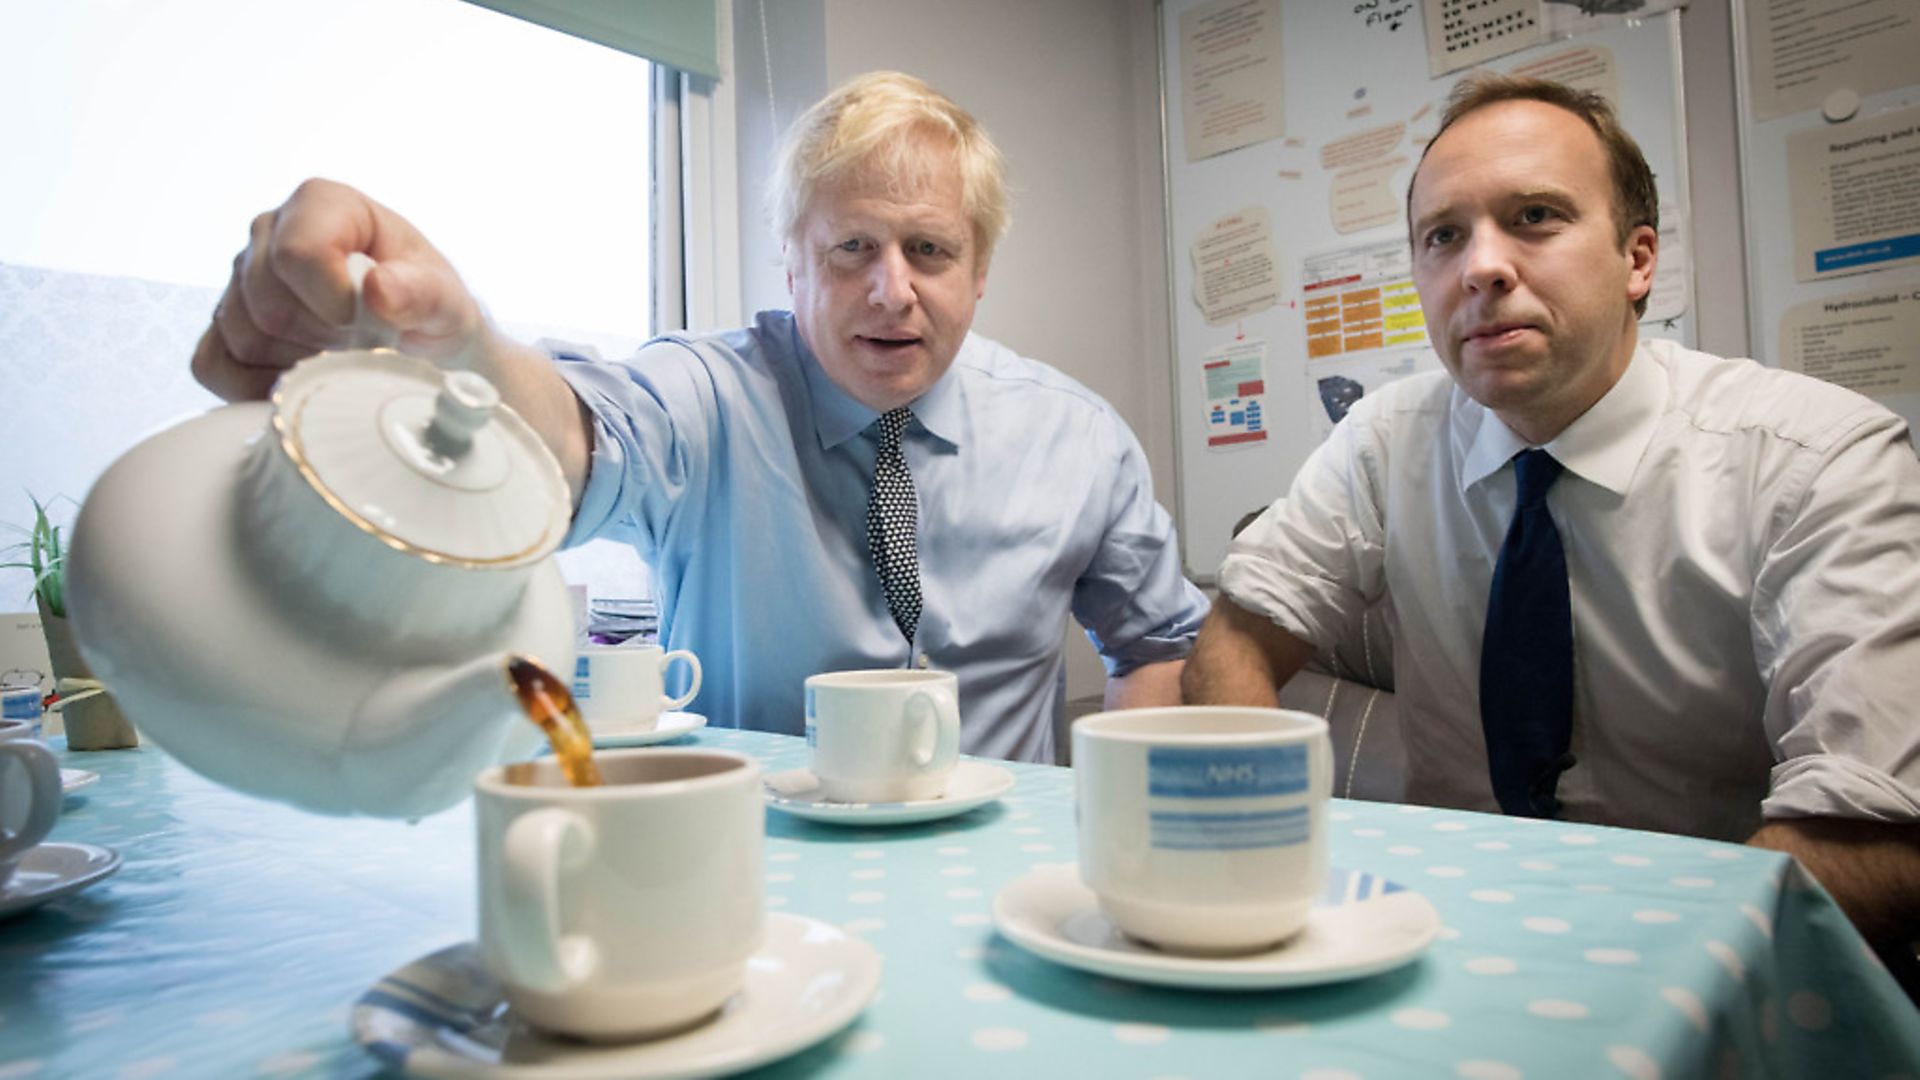 Prime Minister Boris Johnson (left) with Health Secretary Matt Hancock during a visit to Bassetlaw District General Hospital in Worksop. Photograph: Stefan Rousseau/PA Wire. - Credit: PA